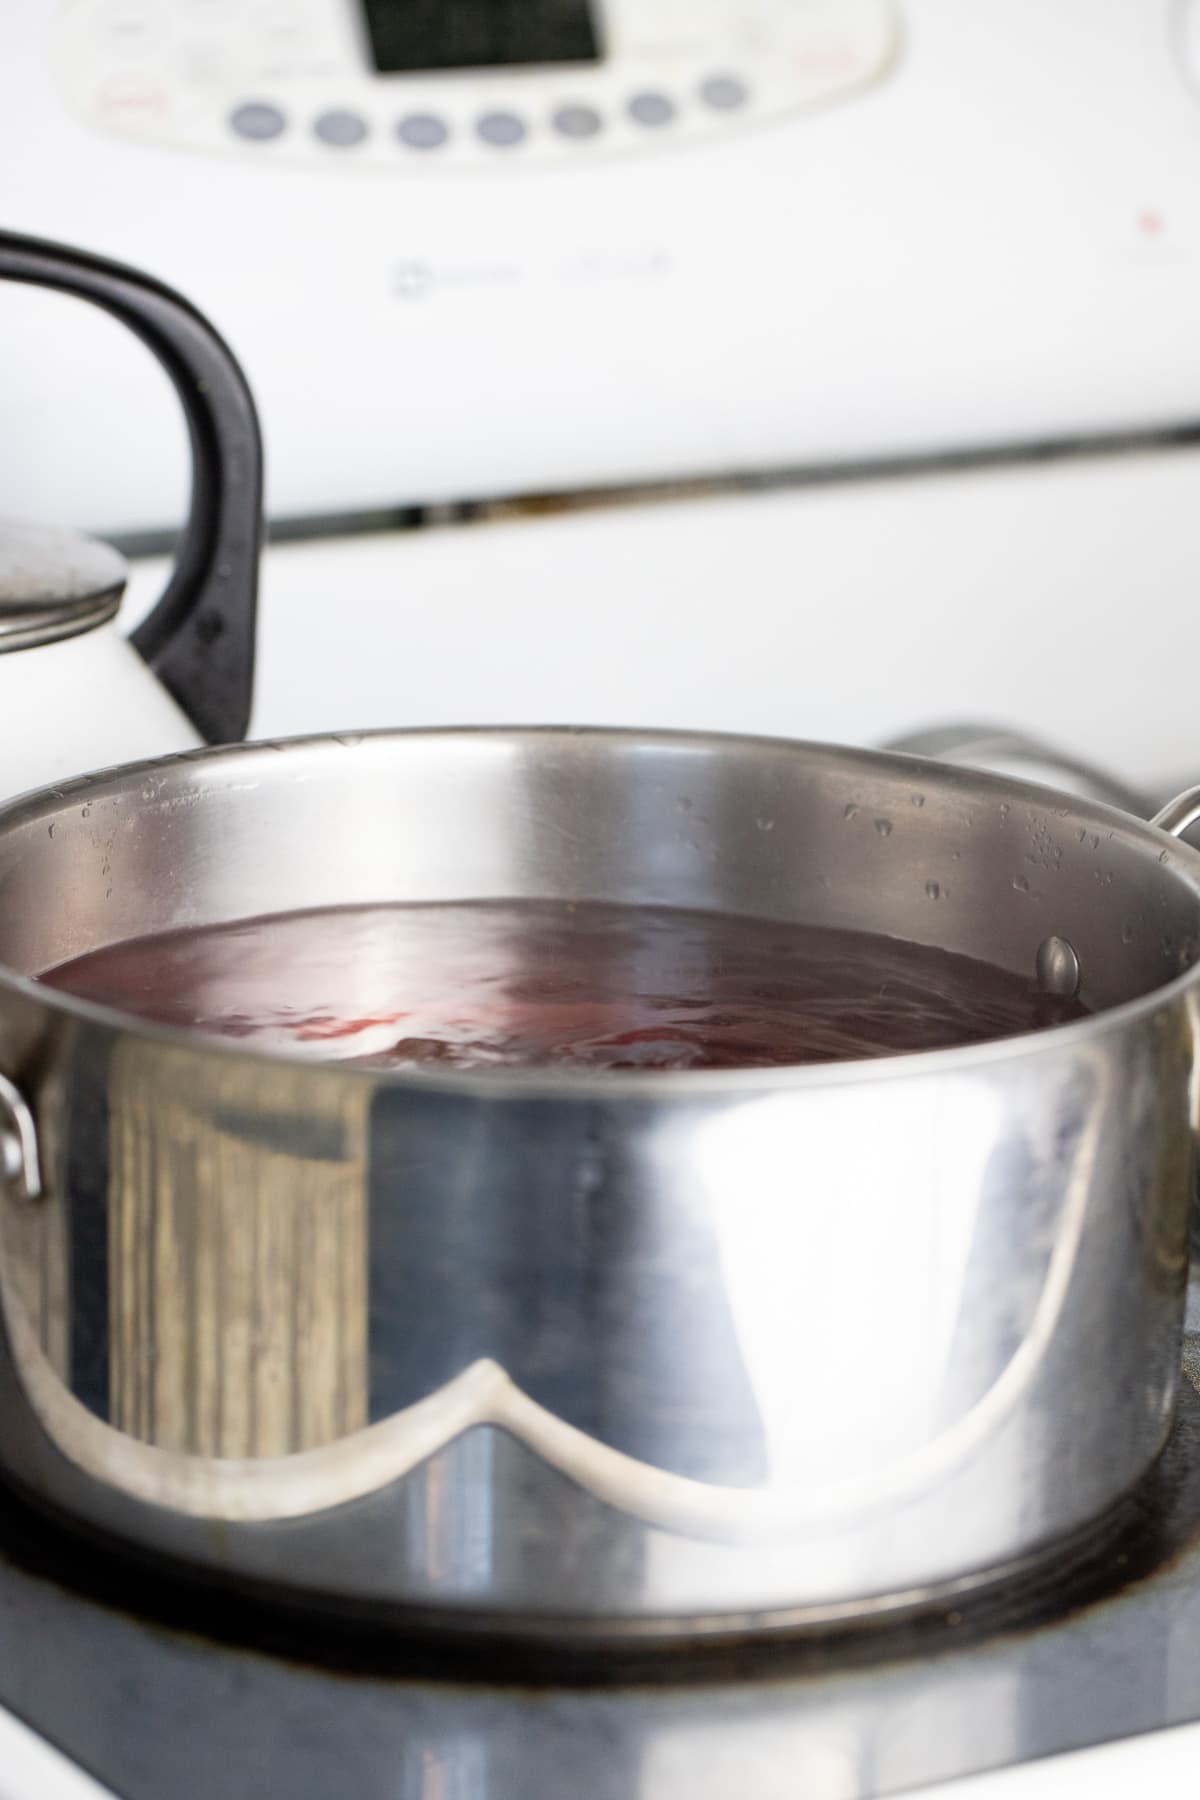 blanching the beets in boiling water